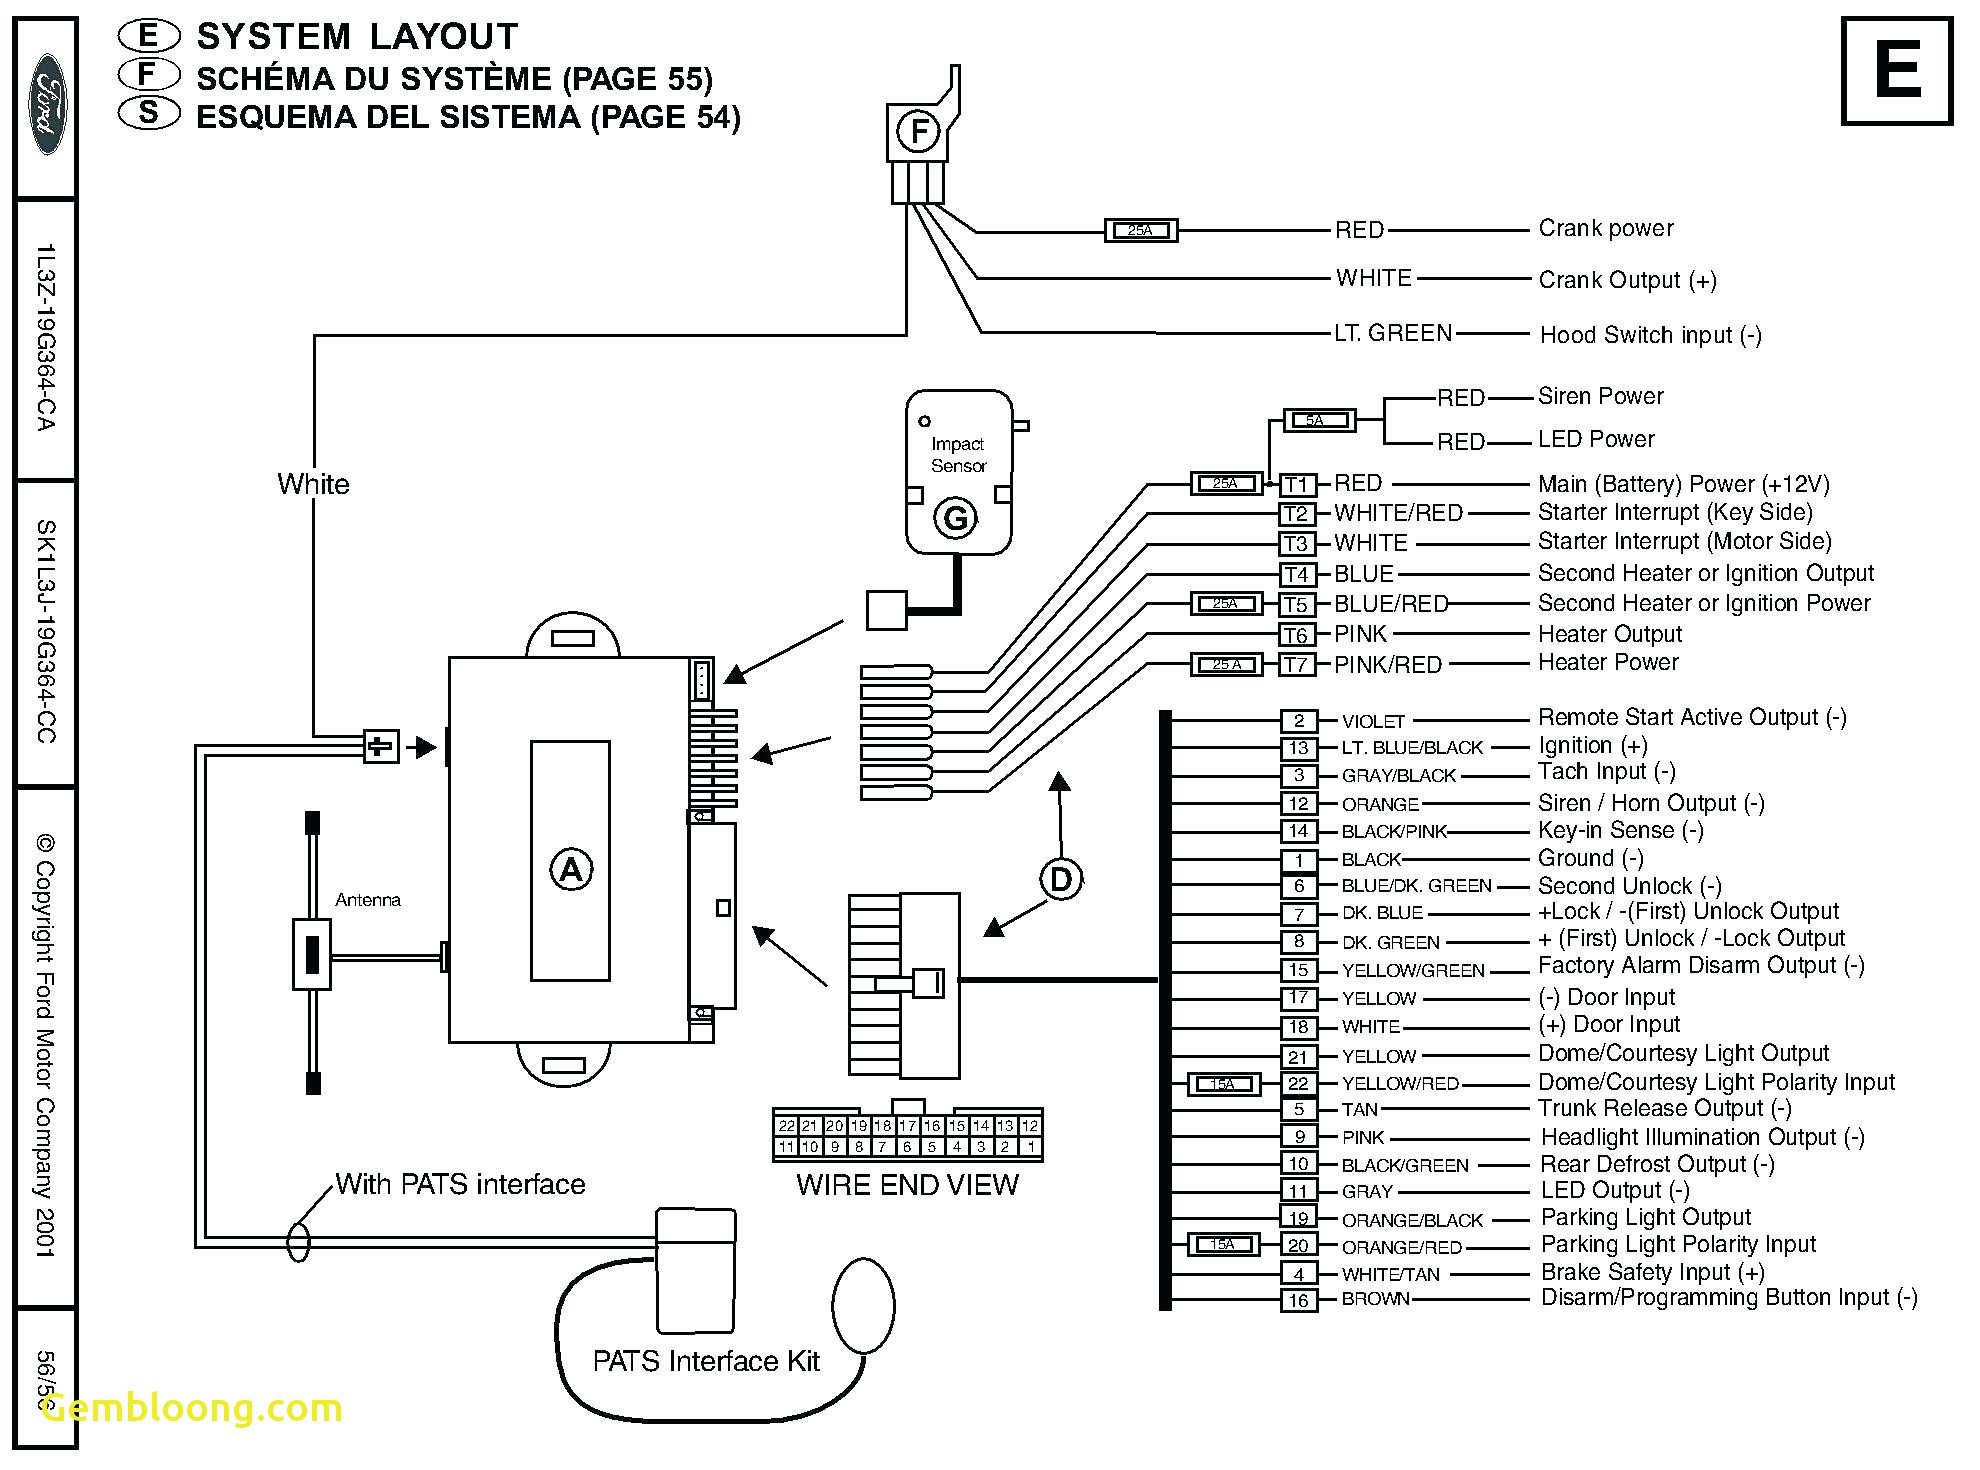 Ready Remote Wiring Diagram Expedition | Manual E-Books - Ready Remote Wiring Diagram